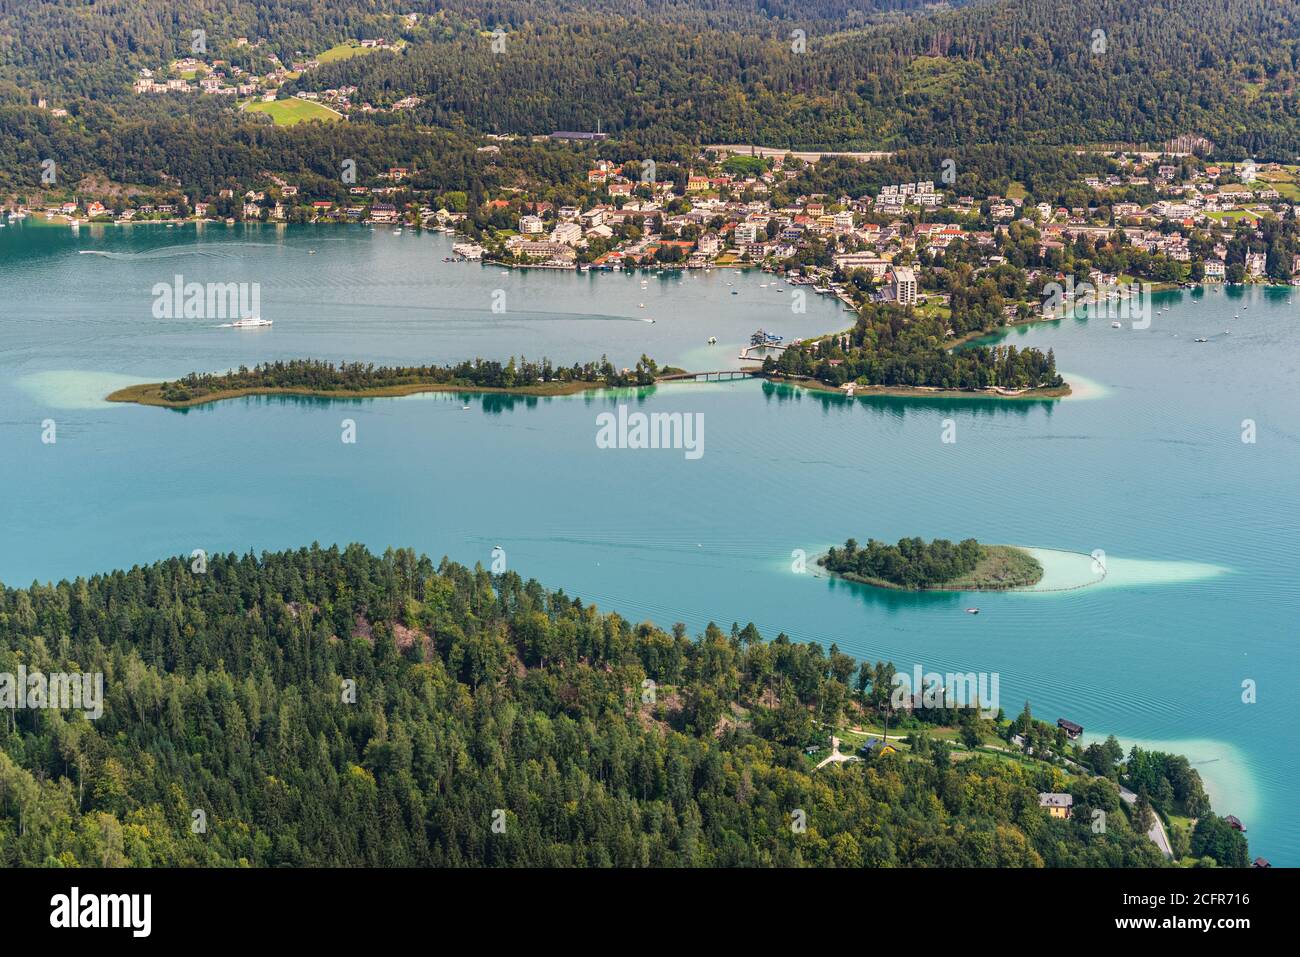 View of islands on the Lake Worthersee, travel destination Stock Photo